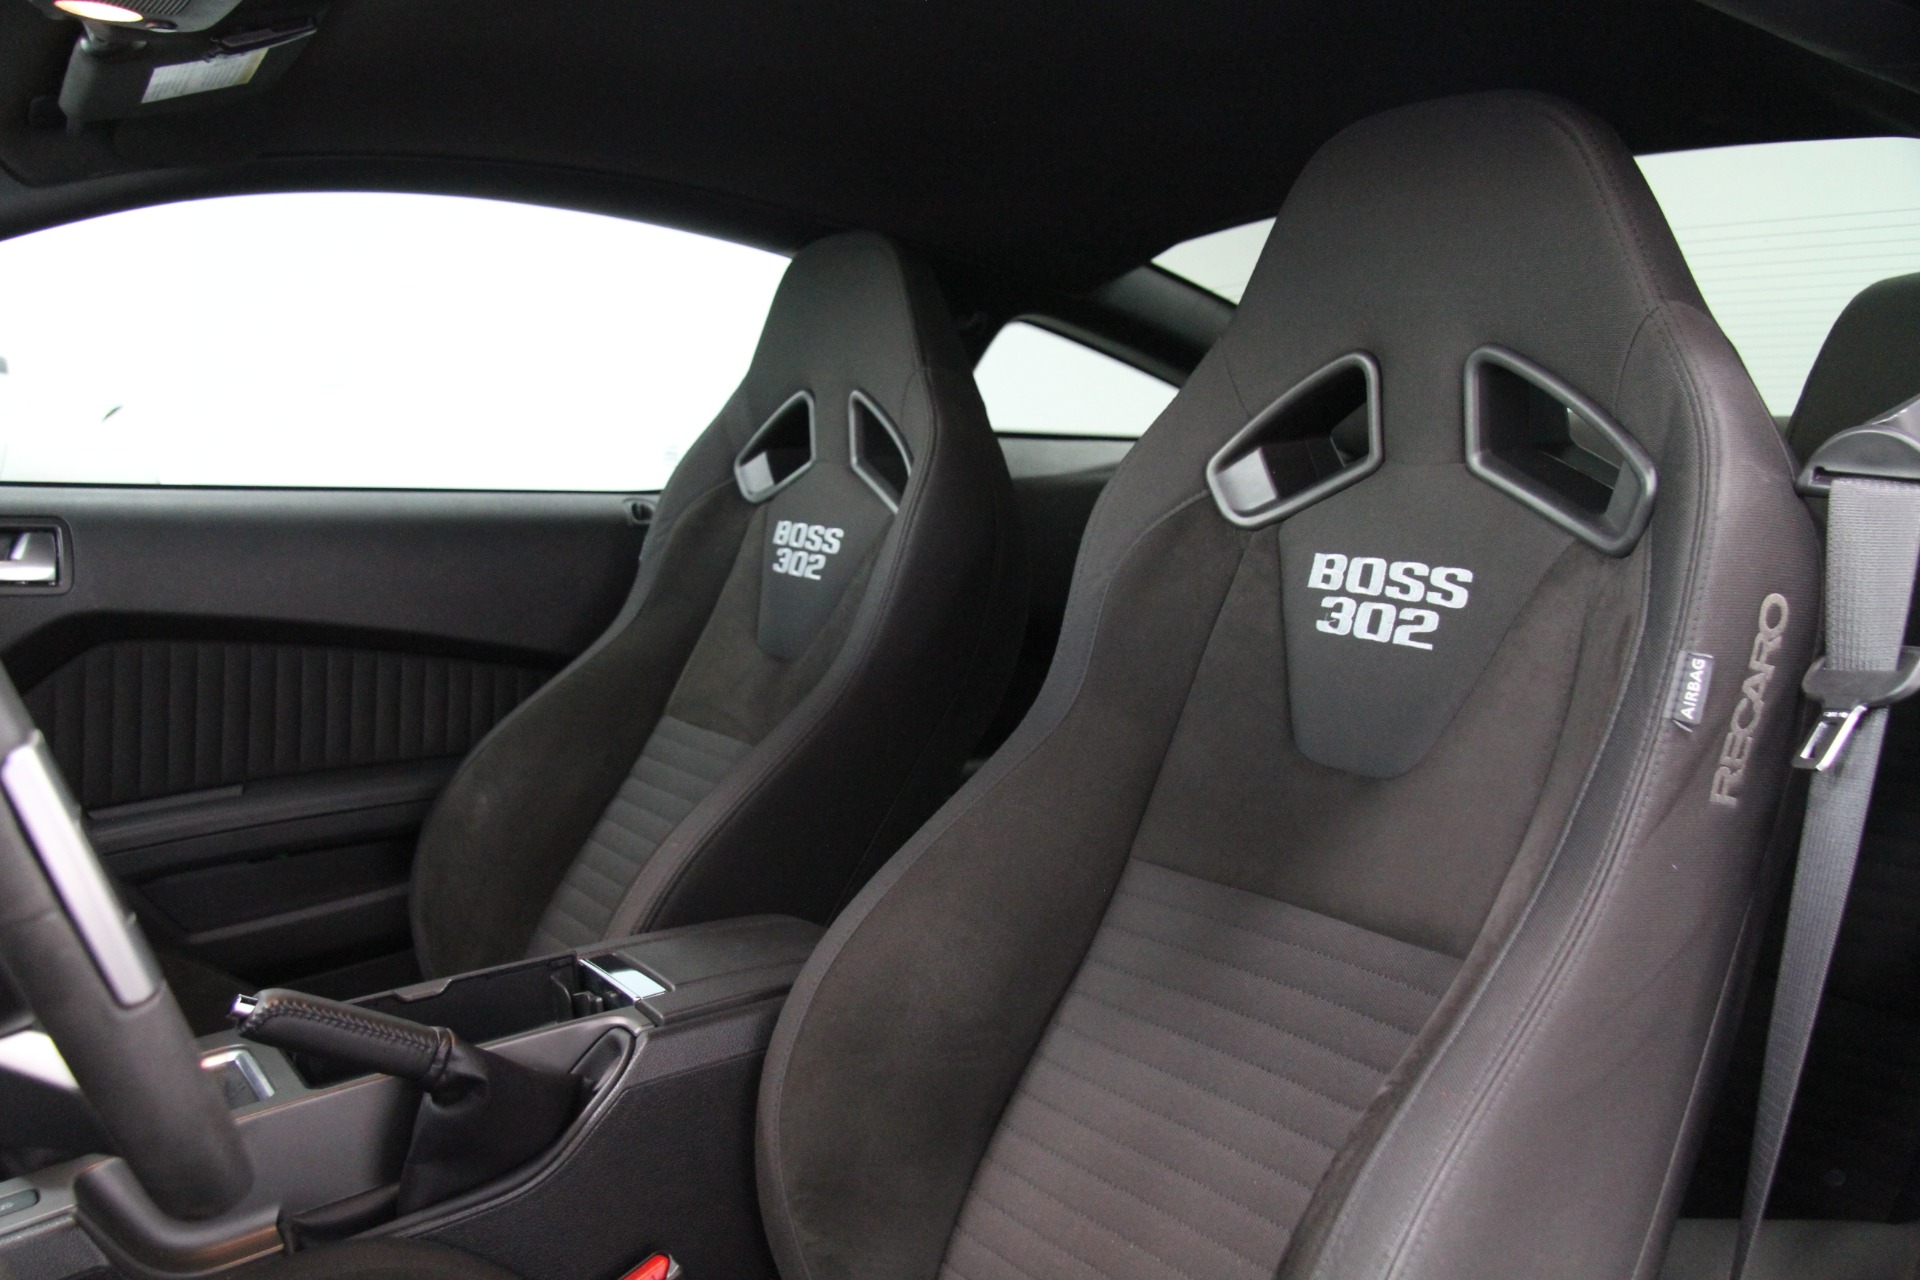 2013 Ford Mustang Boss 302 Stock 267204 For Sale Near